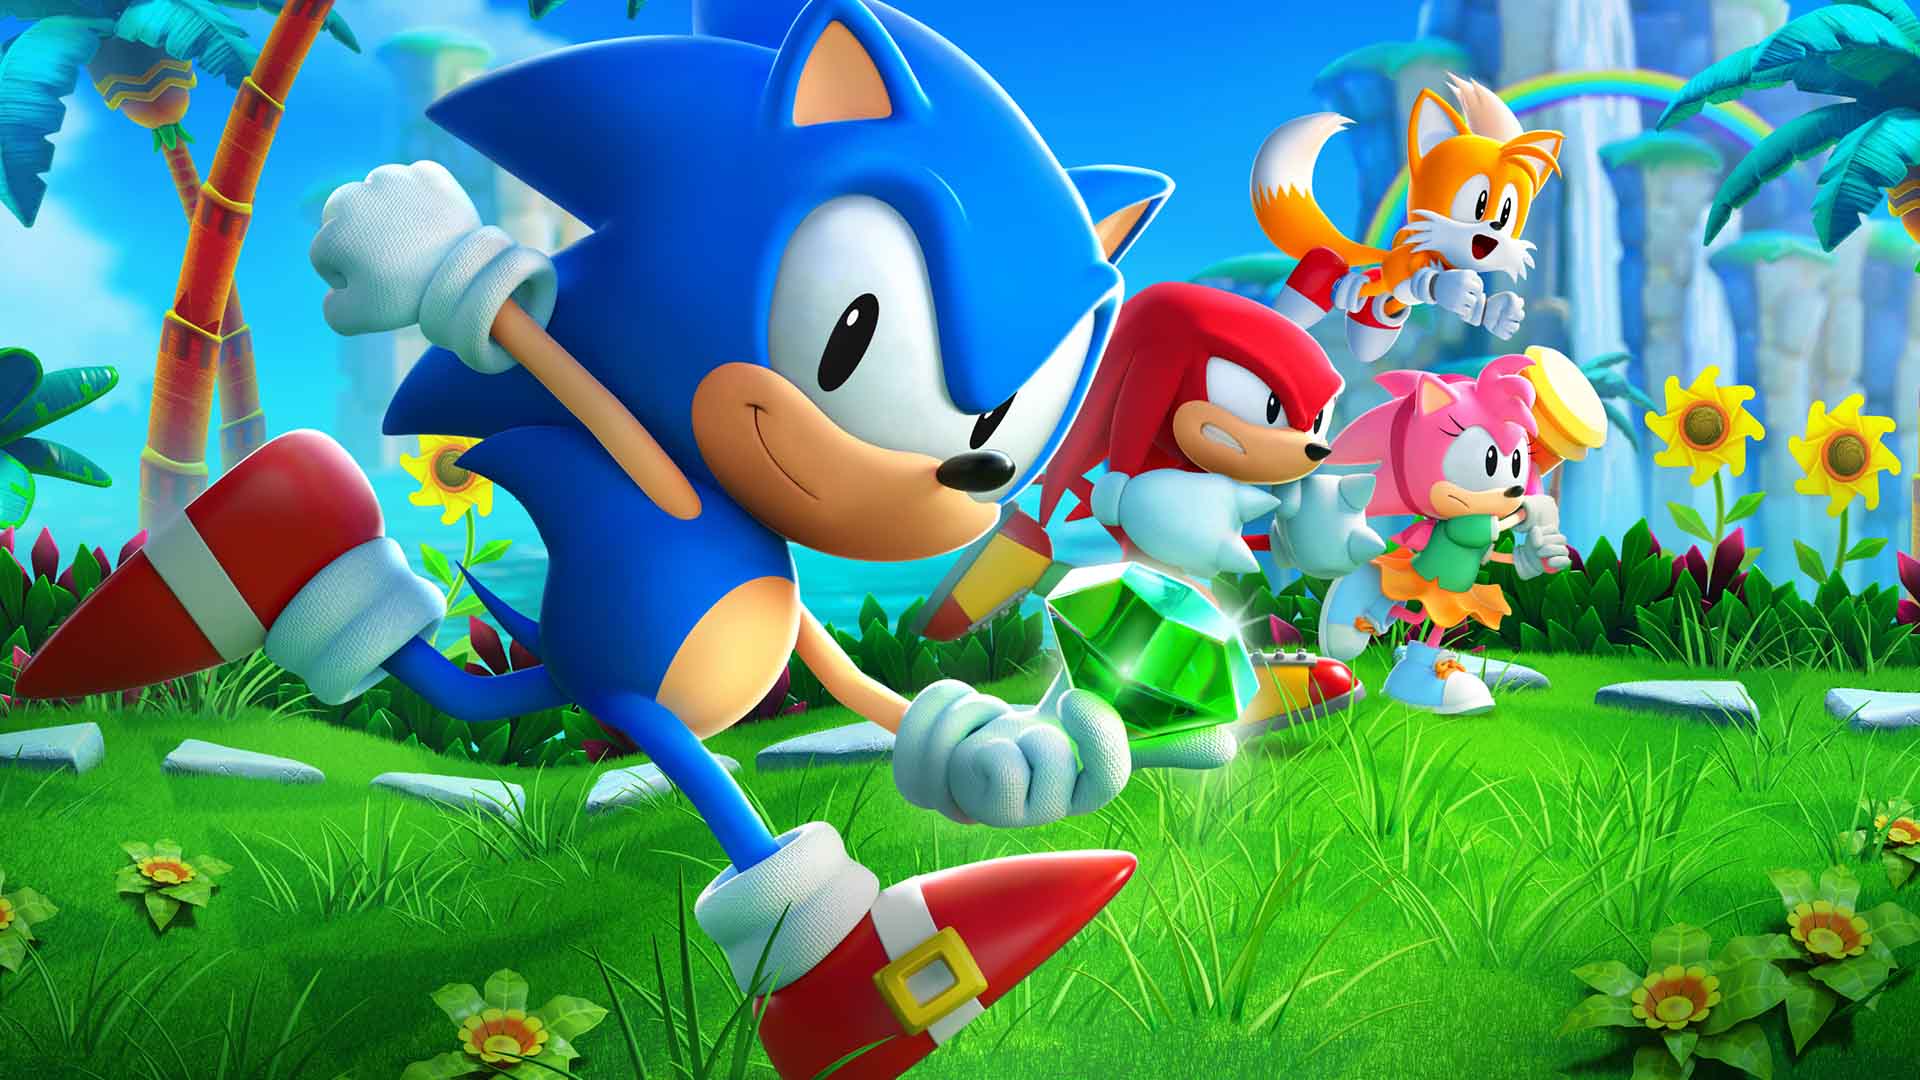 Several Sonic Games Will Disappear From Steam, PS3, and Xbox 360